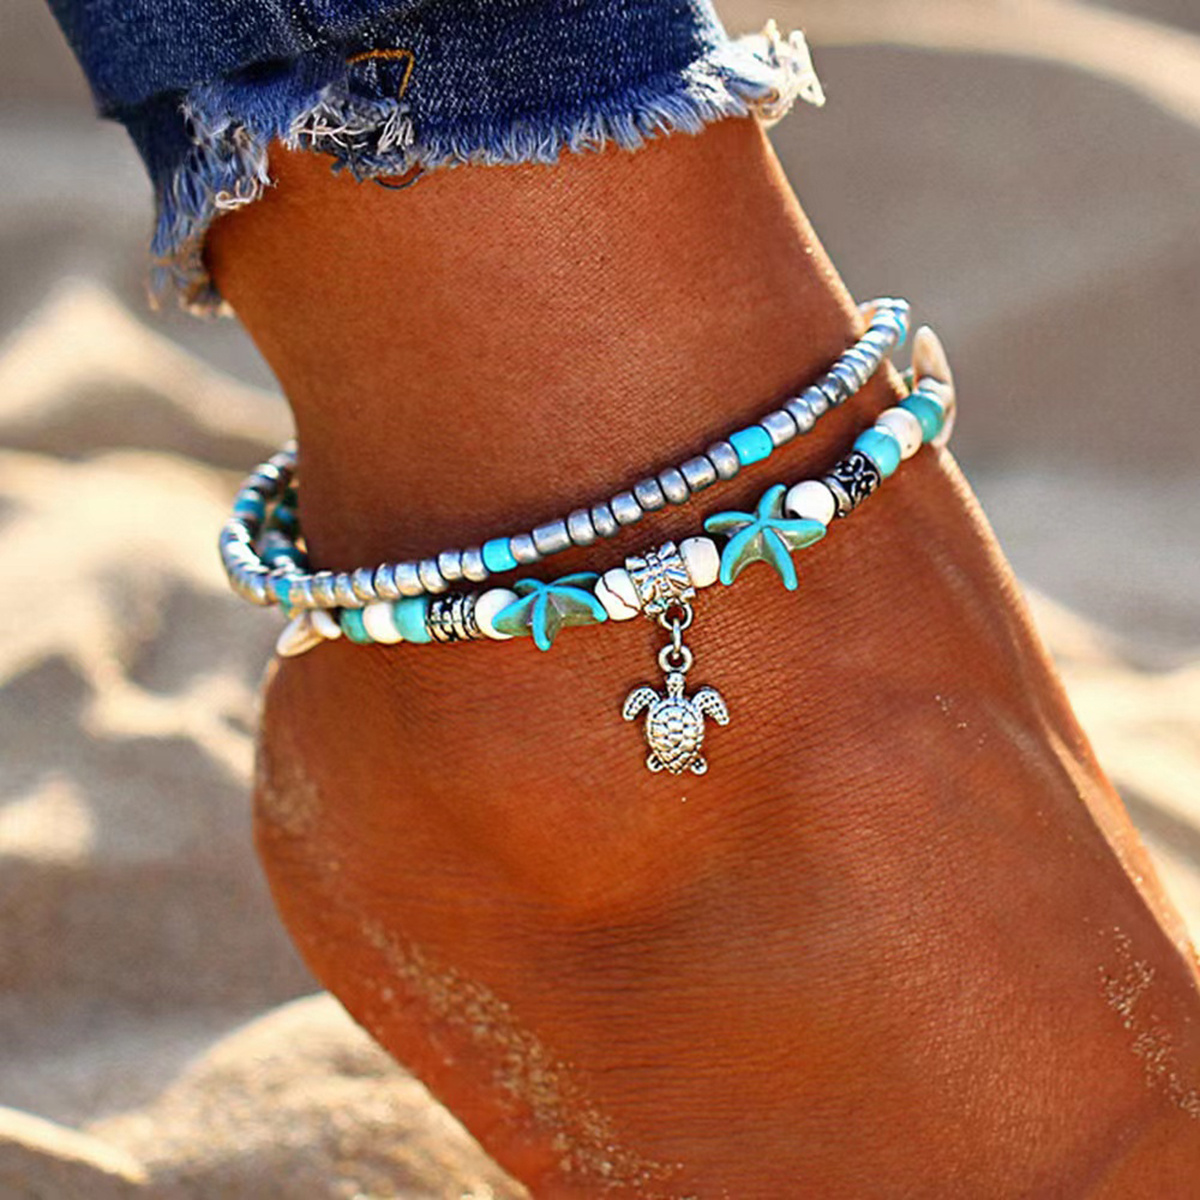 

Beaded Charm Anklet Chain Starfish & Turtle Shaped With Colorful Rice Beads Beach Foot Jewelry Adjustable For Women And Girls